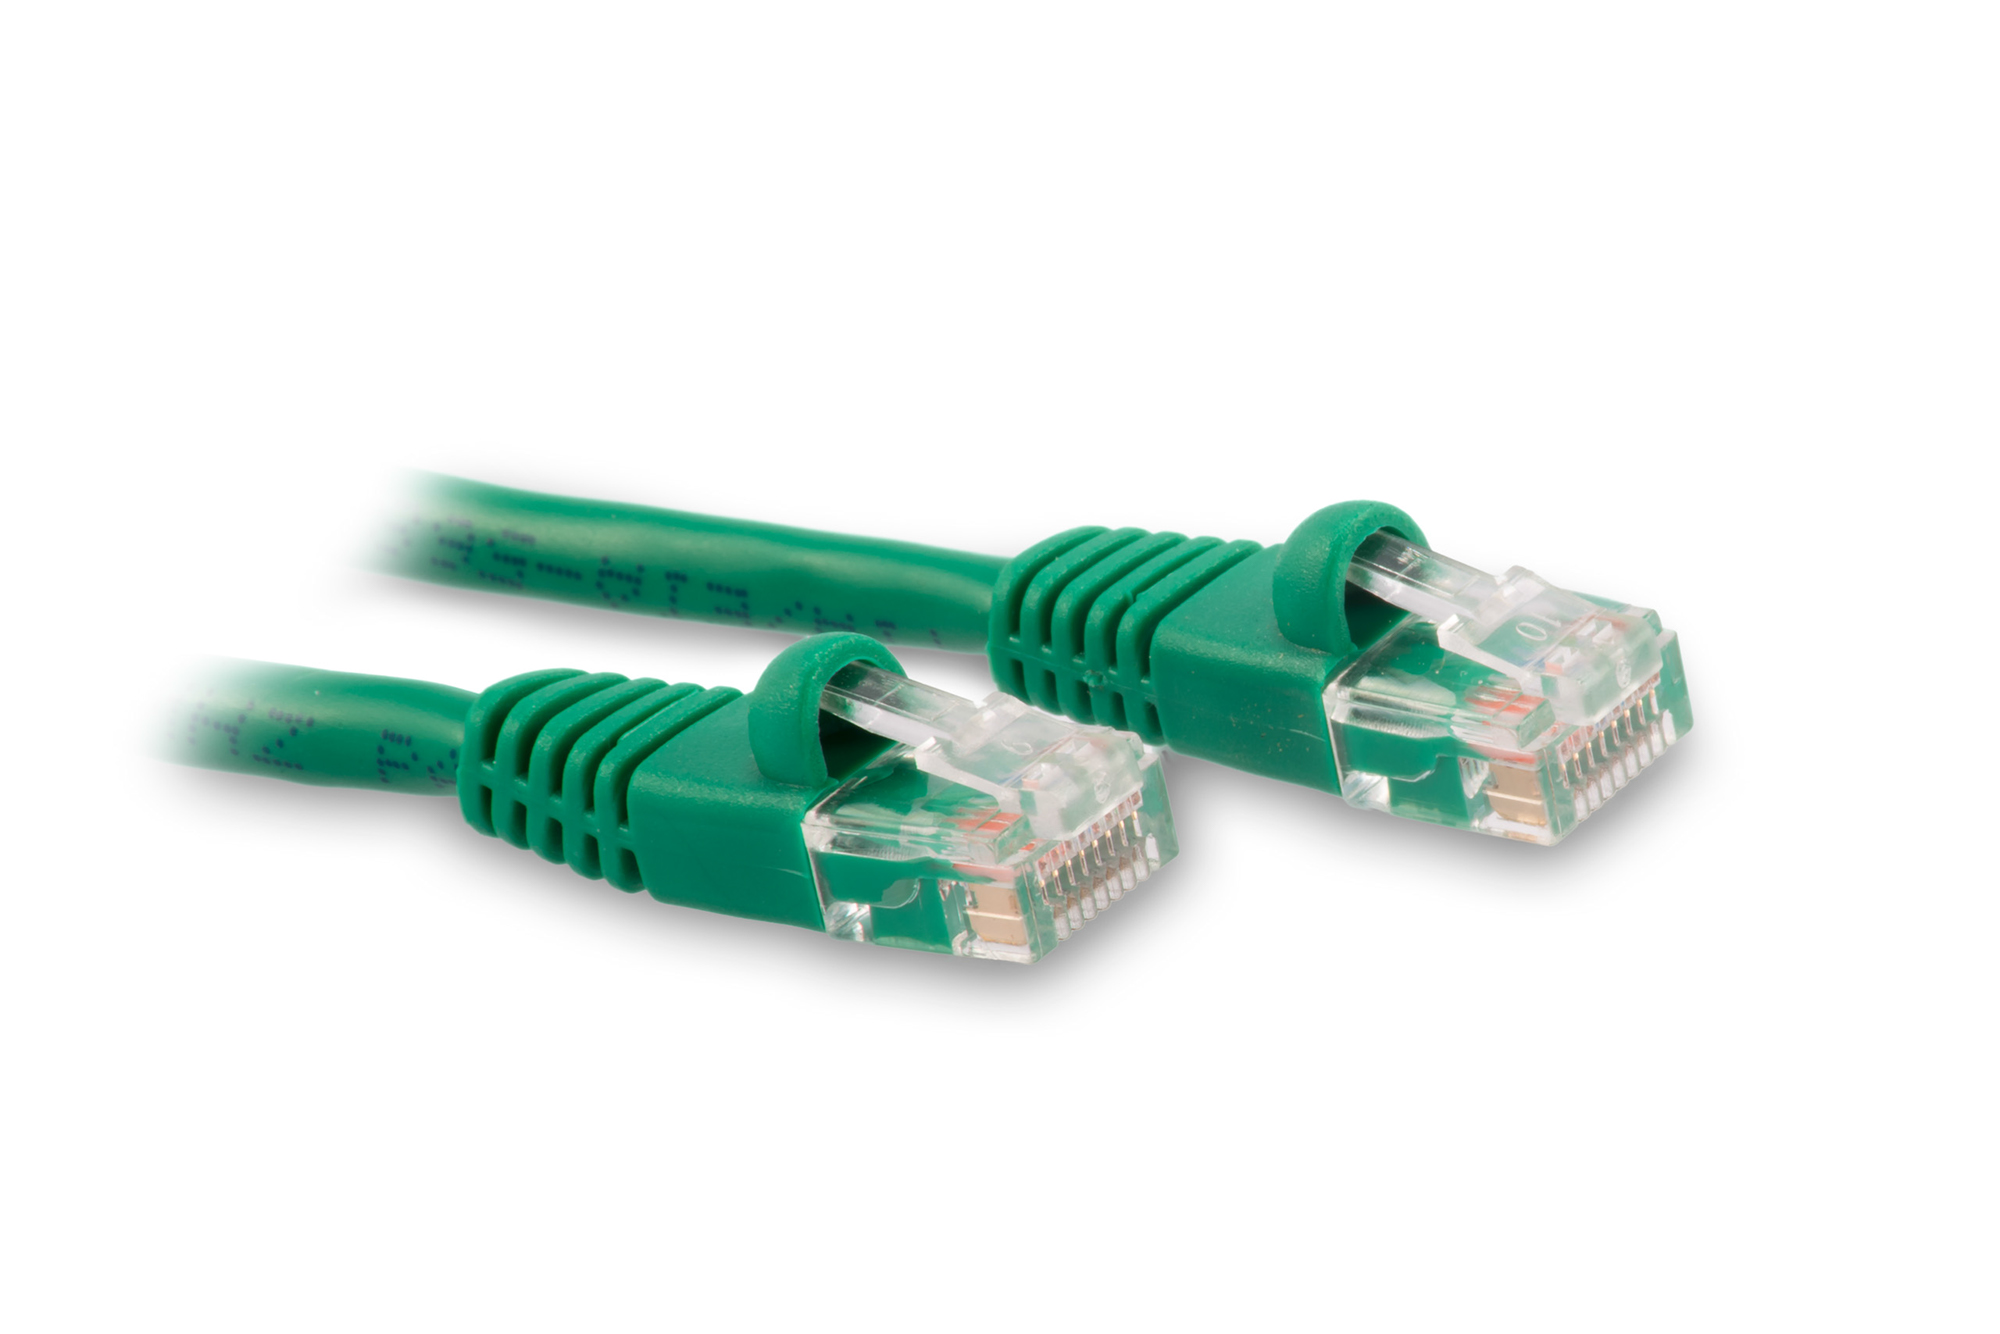 10ft Cat6 Ethernet Patch Cable - Green Color - Snagless Boot